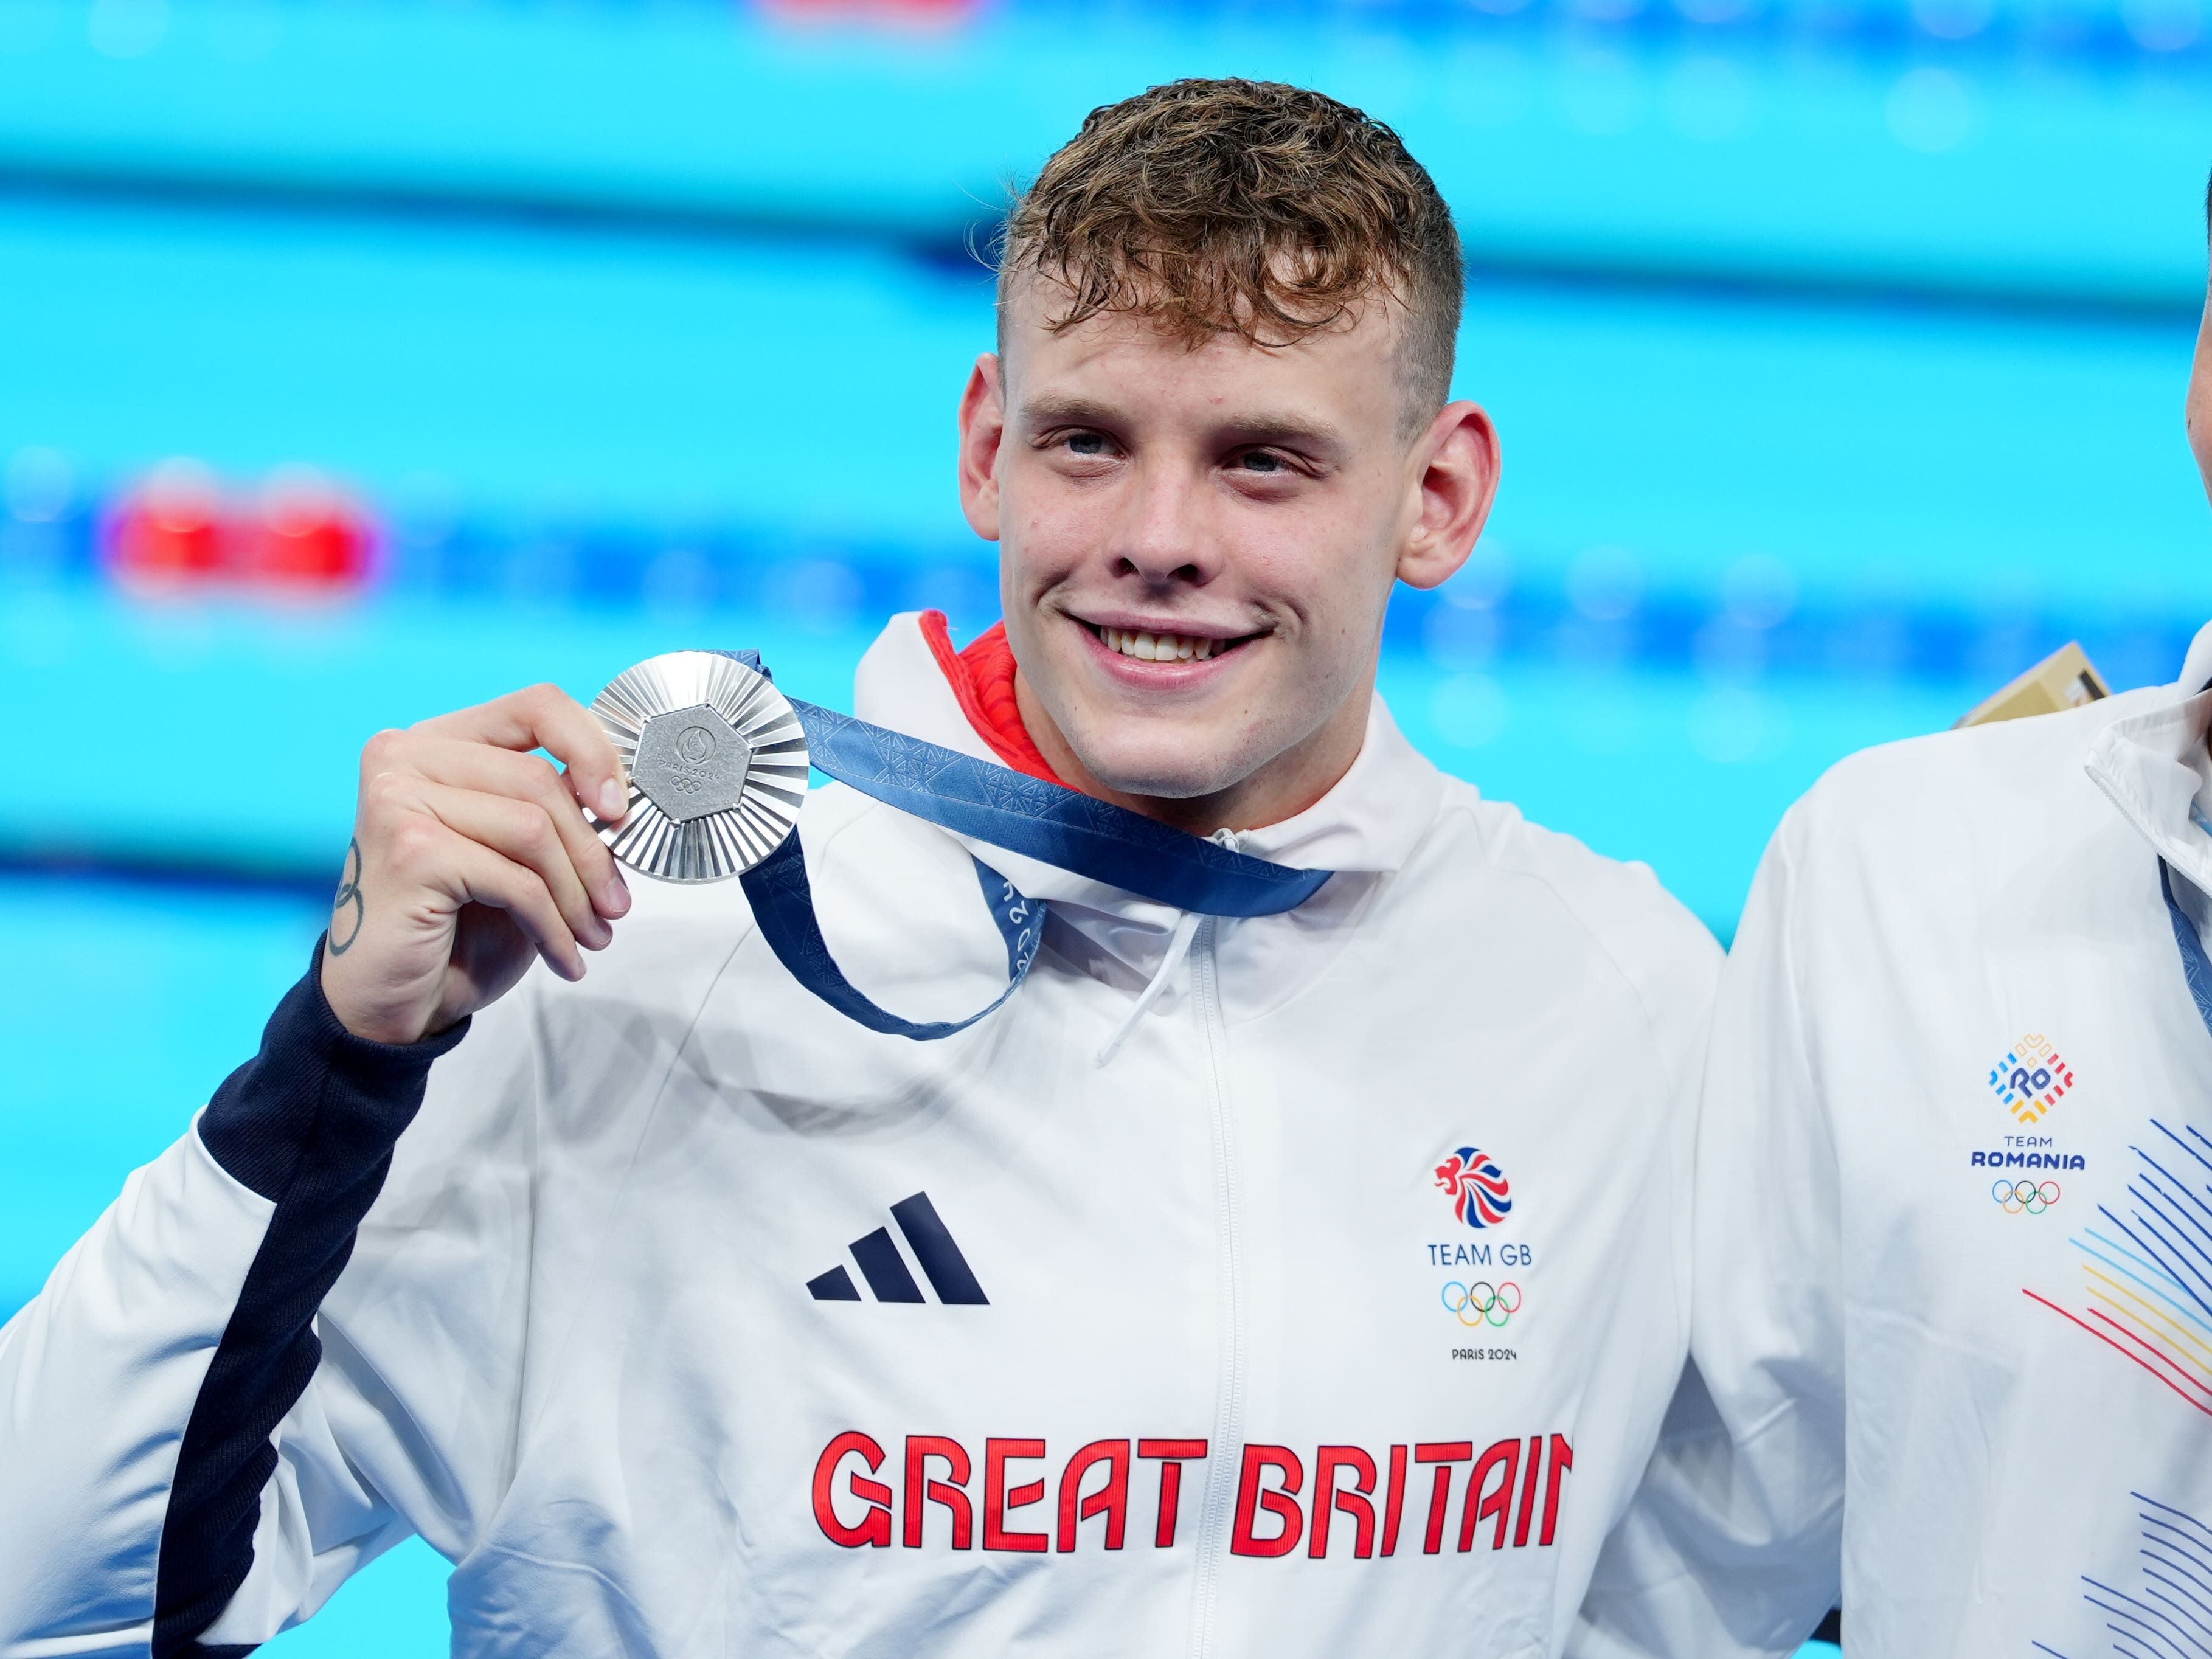 Matt Richards rues his finish after narrowly missing out on 200m freestyle gold